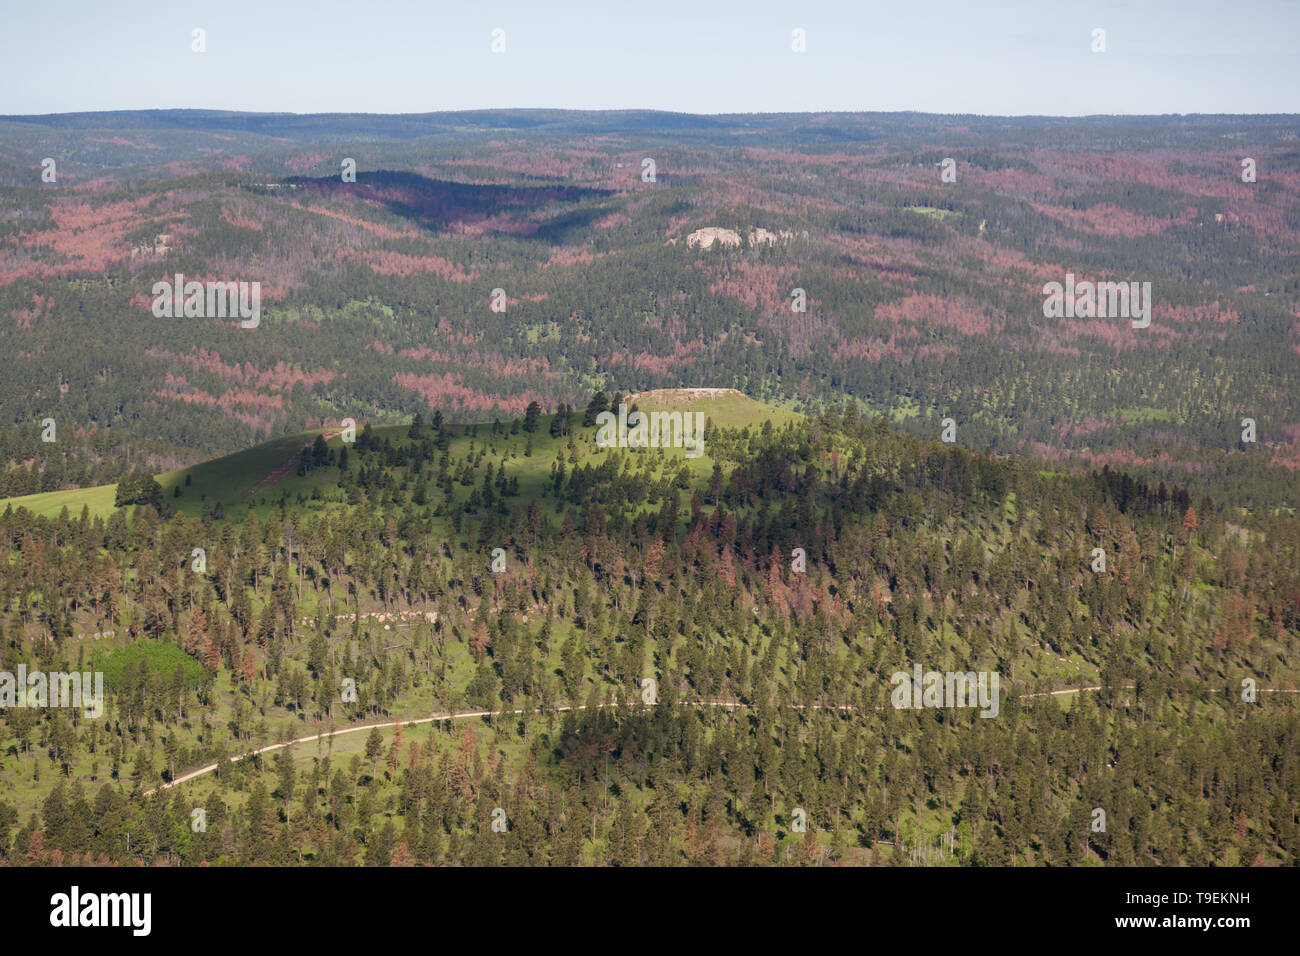 An aerial view of the Black Hills area of South Dakota showing a large area with groups of dead and dying trees due to a pine beetle infestation. Stock Photo